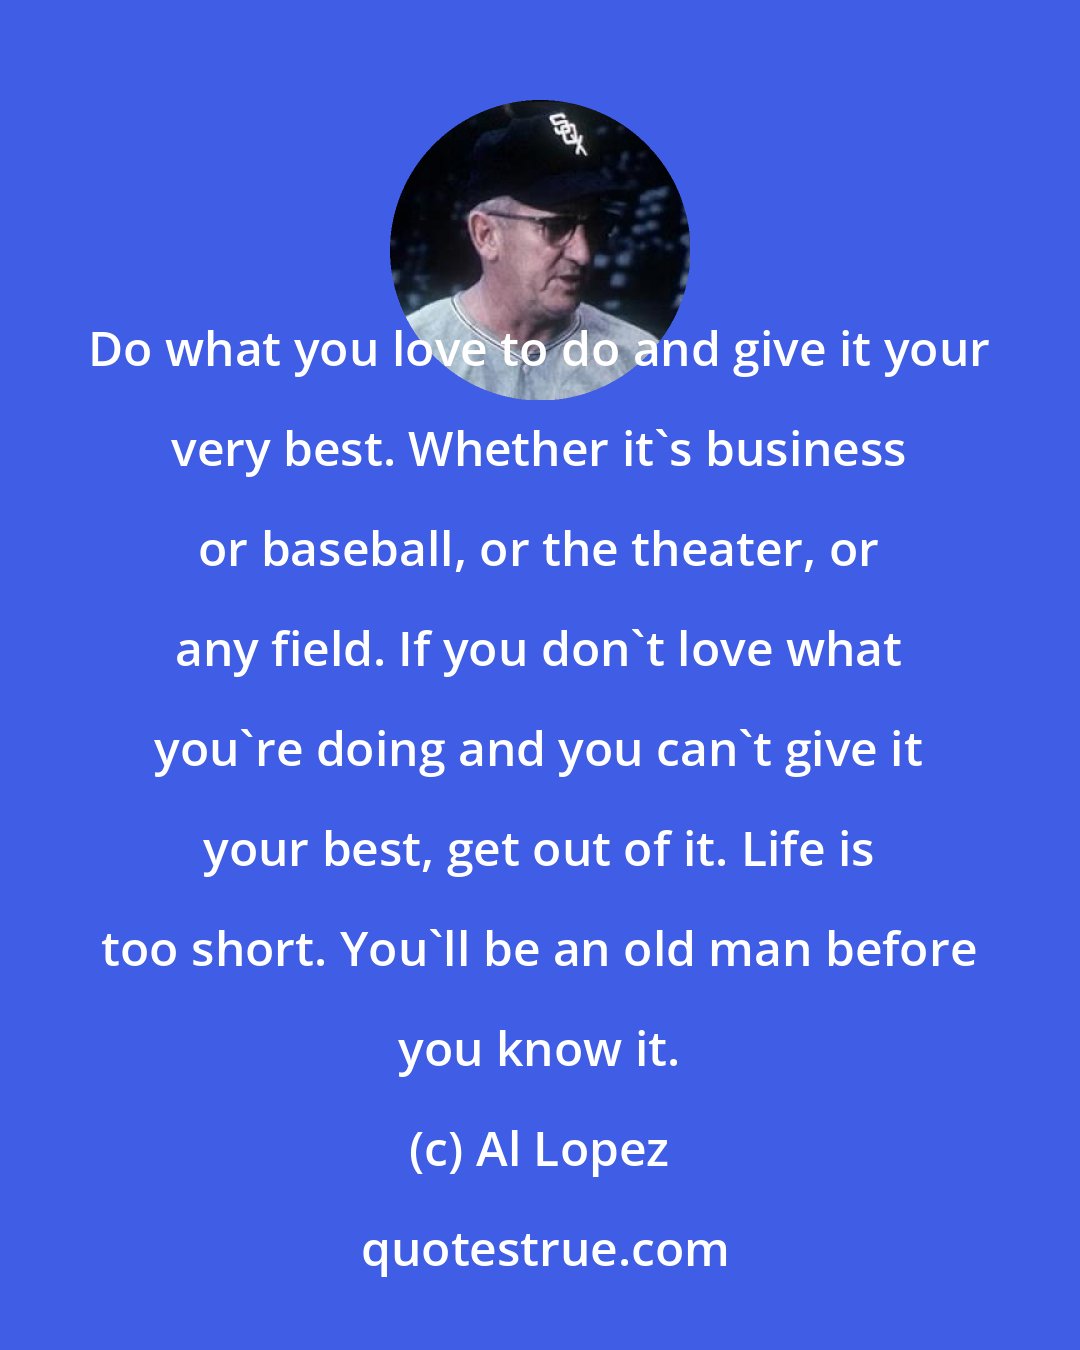 Al Lopez: Do what you love to do and give it your very best. Whether it's business or baseball, or the theater, or any field. If you don't love what you're doing and you can't give it your best, get out of it. Life is too short. You'll be an old man before you know it.